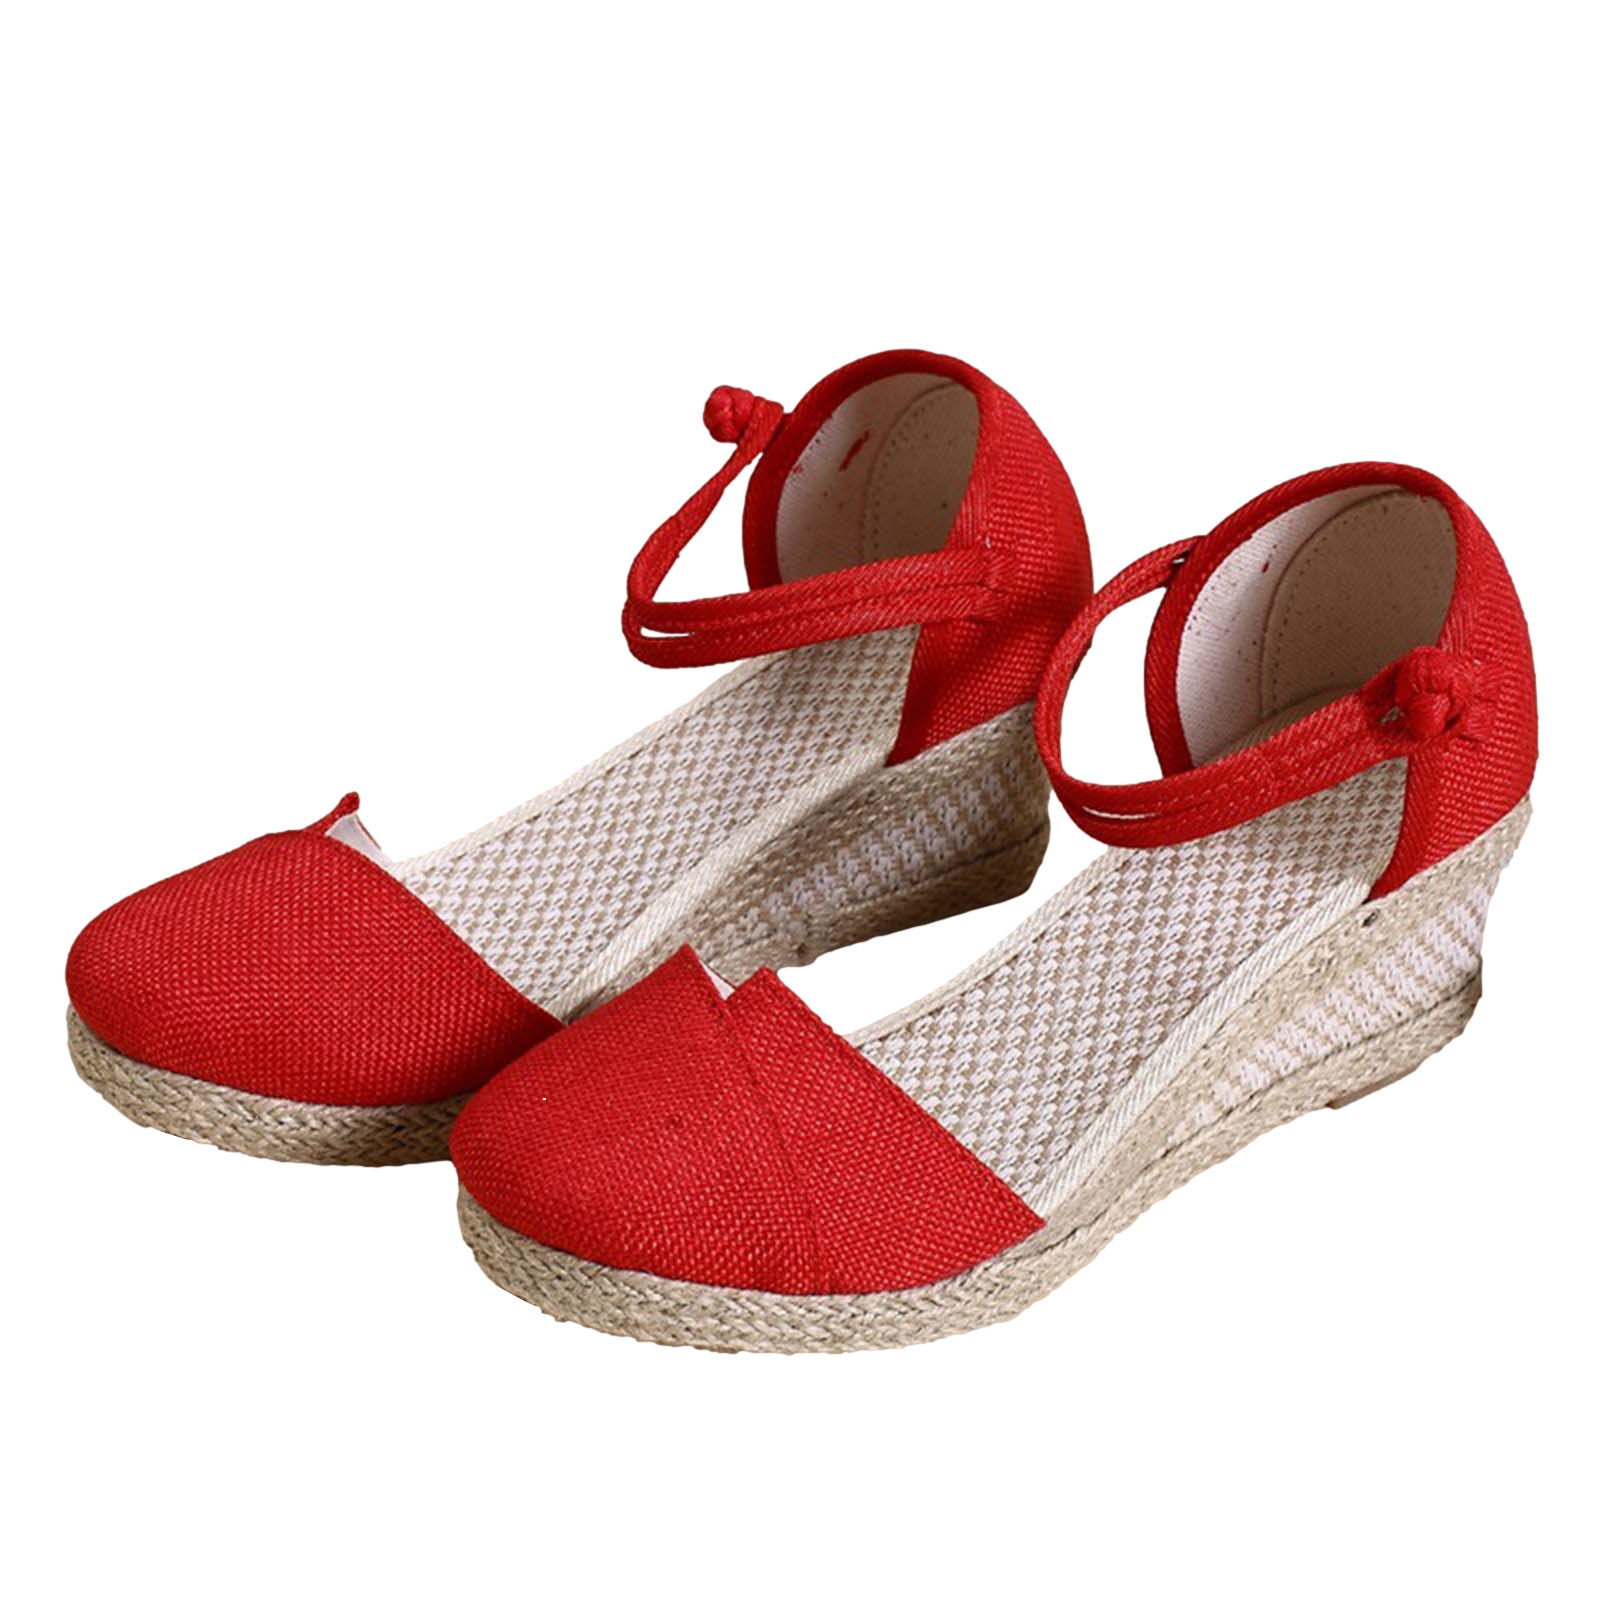 Anuirheih Closed Toe Wedges for Women, Platform Summer Shoes Ankle ...